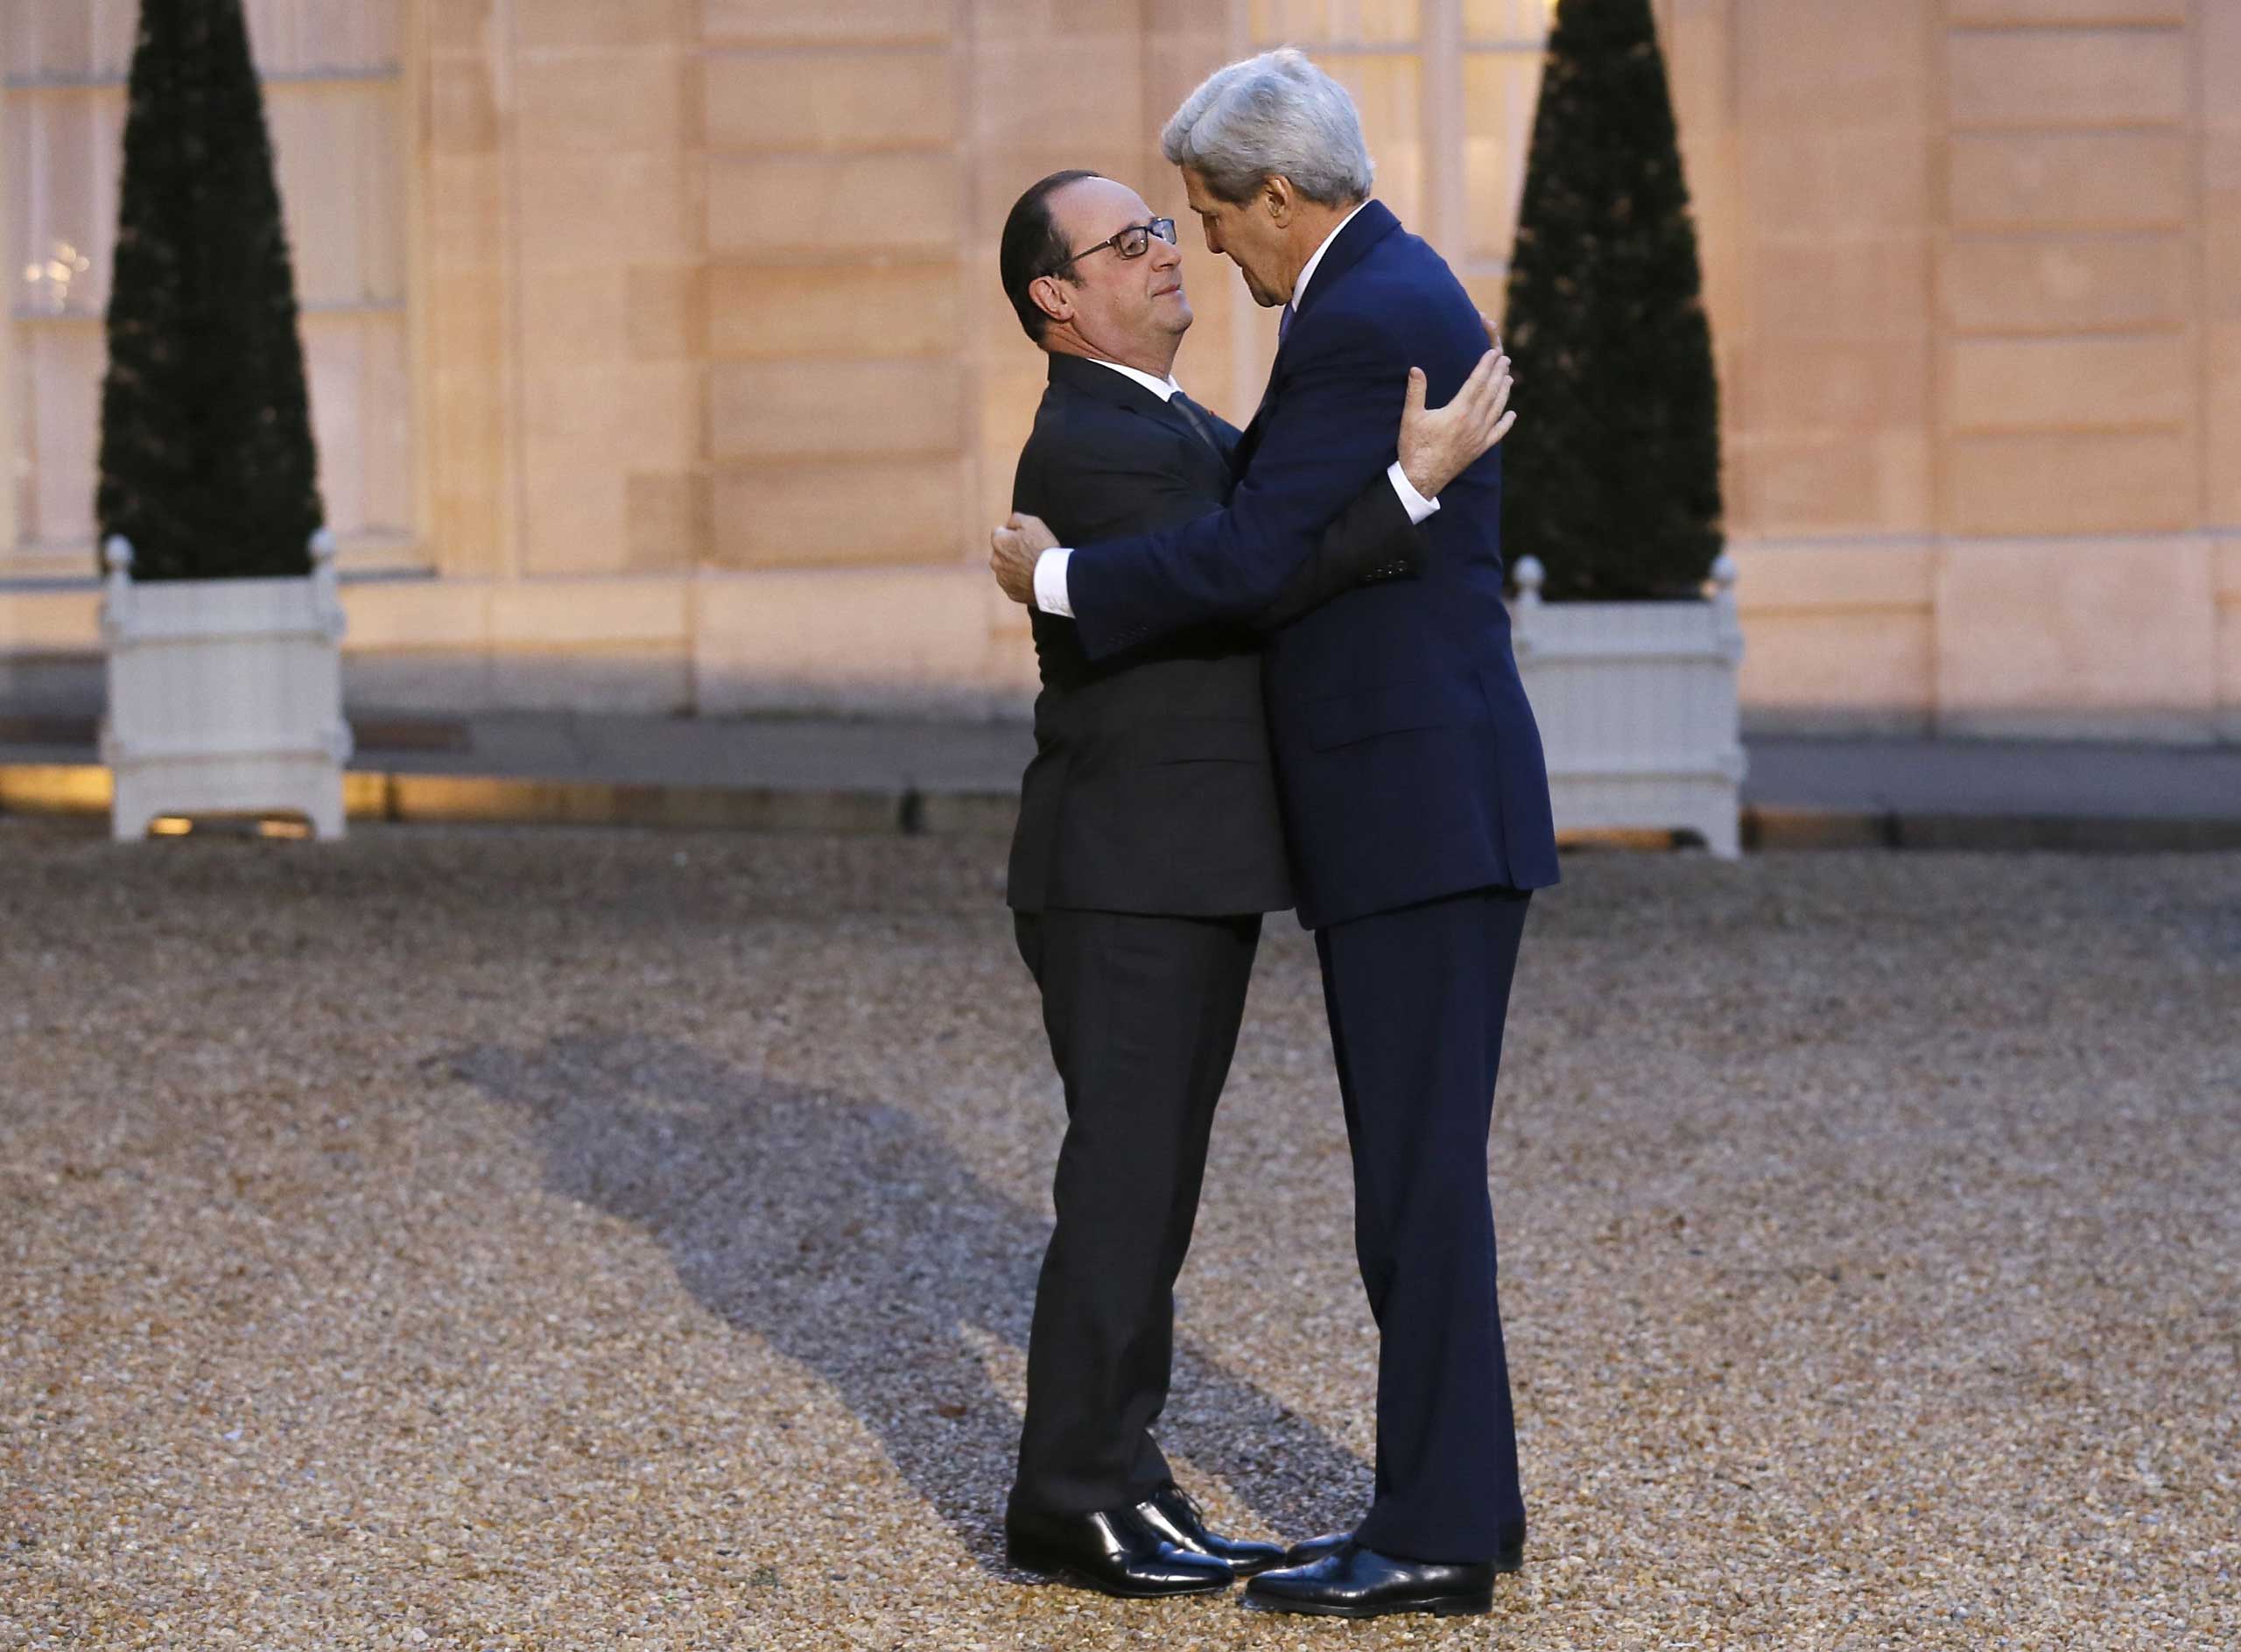 Jan. 16, 2015. French President Francois Hollande (L) embraces U.S. Secretary of State John Kerry prior to a meeting at the Elysee Palace in Paris. Kerry's visit came after criticism of the U.S. for not sending a top-level representative to a march in Paris that drew 1.5 million people and dozens of world leaders in the wake of the attacks.